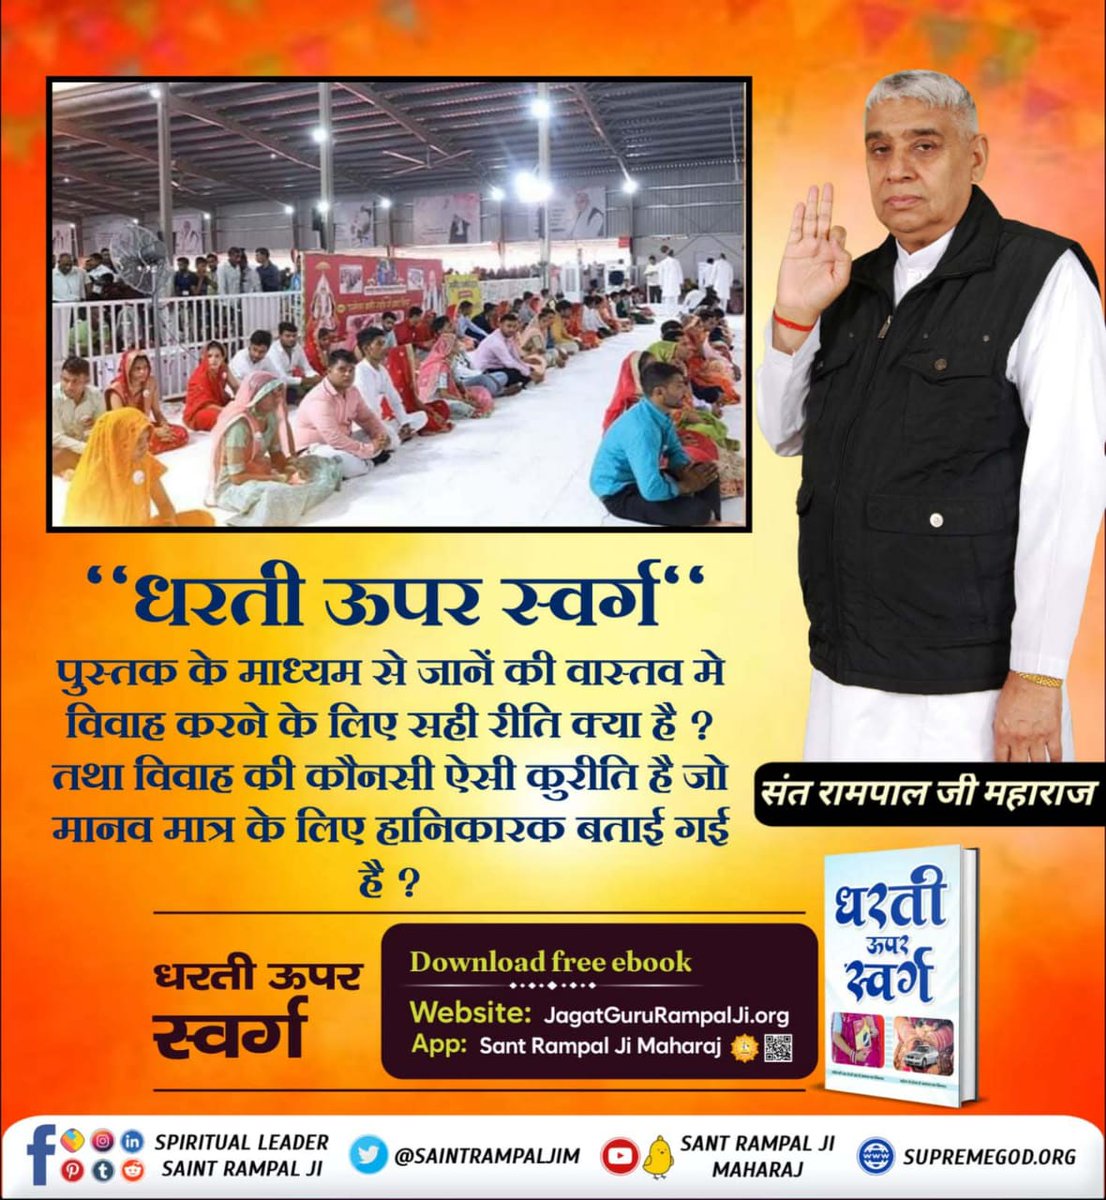 #GodMorningTuesday
Saint Rampal Ji Maharaj with his Tatvgyan (philosophy) is ending the social evils spread in the society like dowry system, Bhaat tradition, festivals contrary to scriptures, useless traditions, useless customs.
#धरती_को_स्वर्ग_बनाना_है